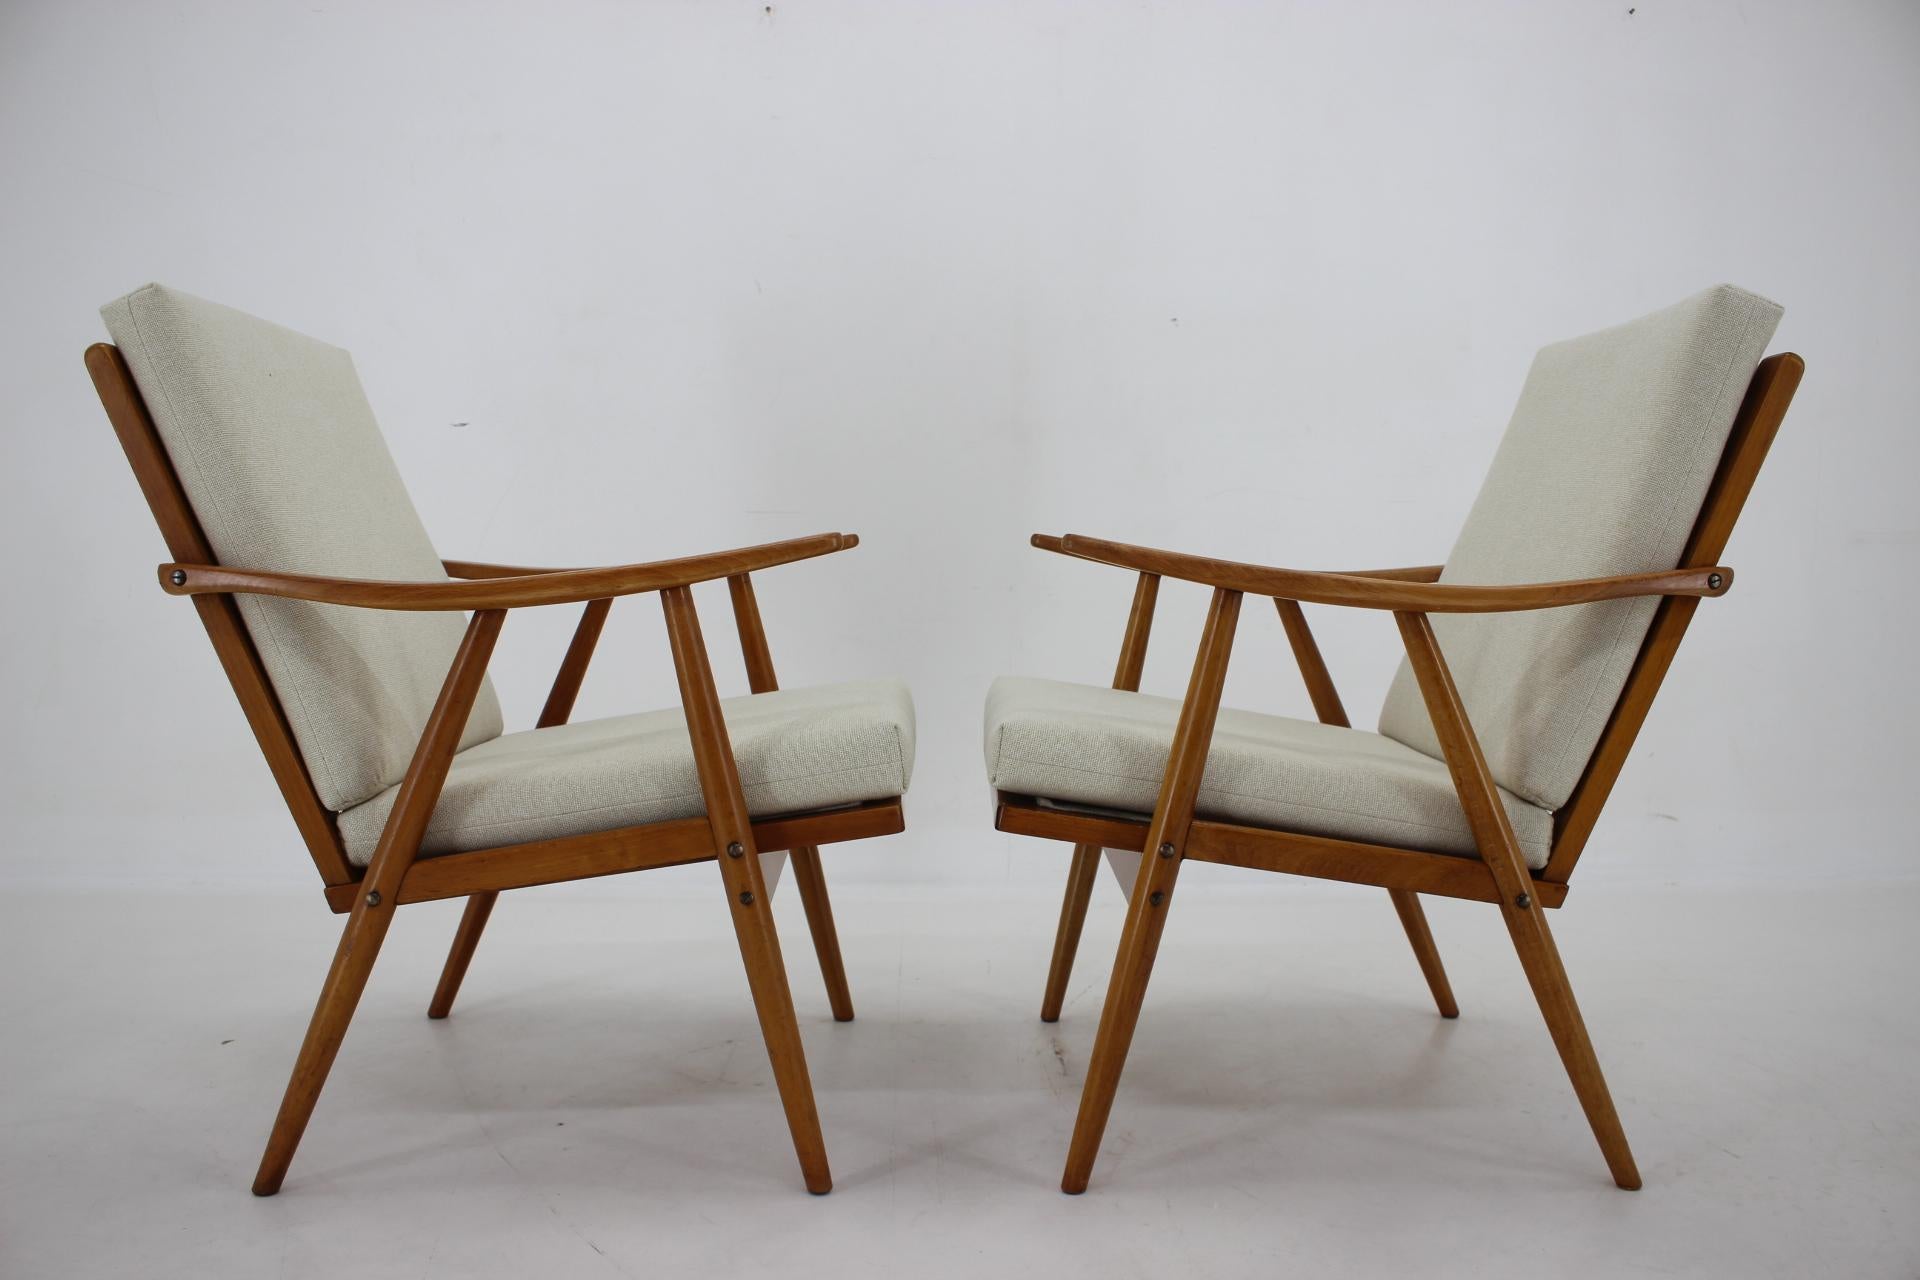 Late 20th Century 1970s Pair of Beech Armchairs, Czechoslovakia For Sale